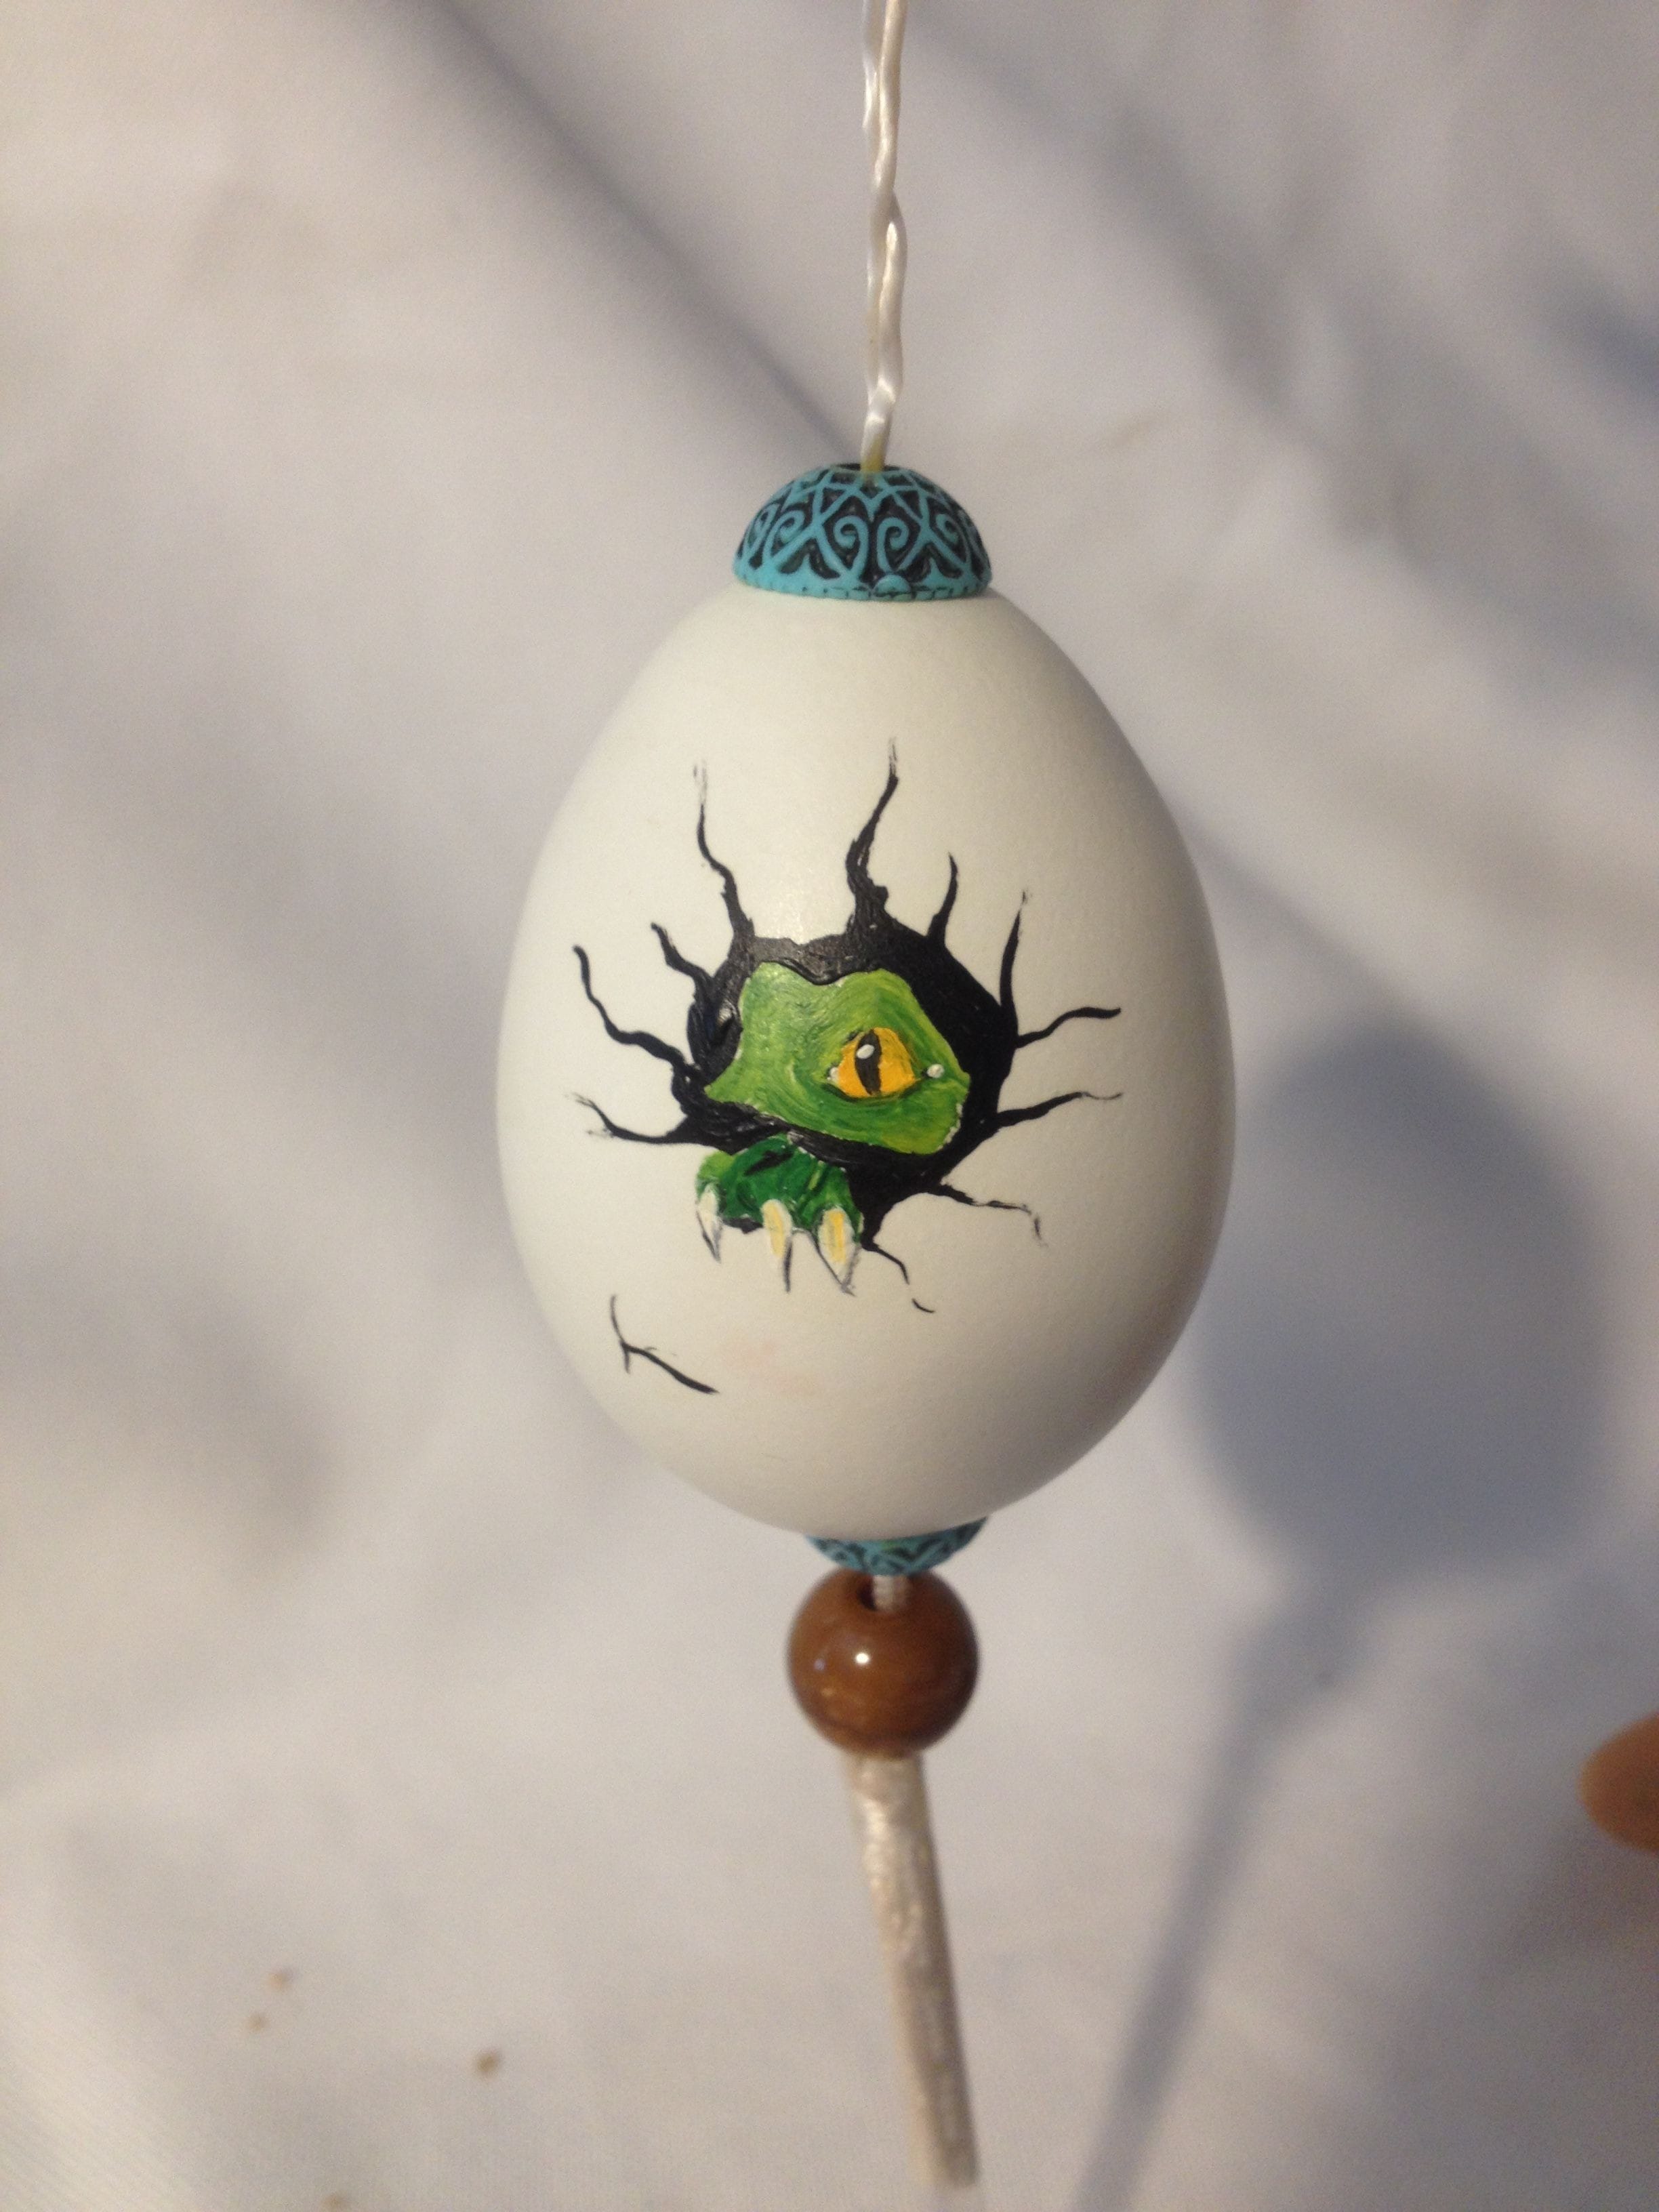 Painted chicken egg with green dragonett's face$20.